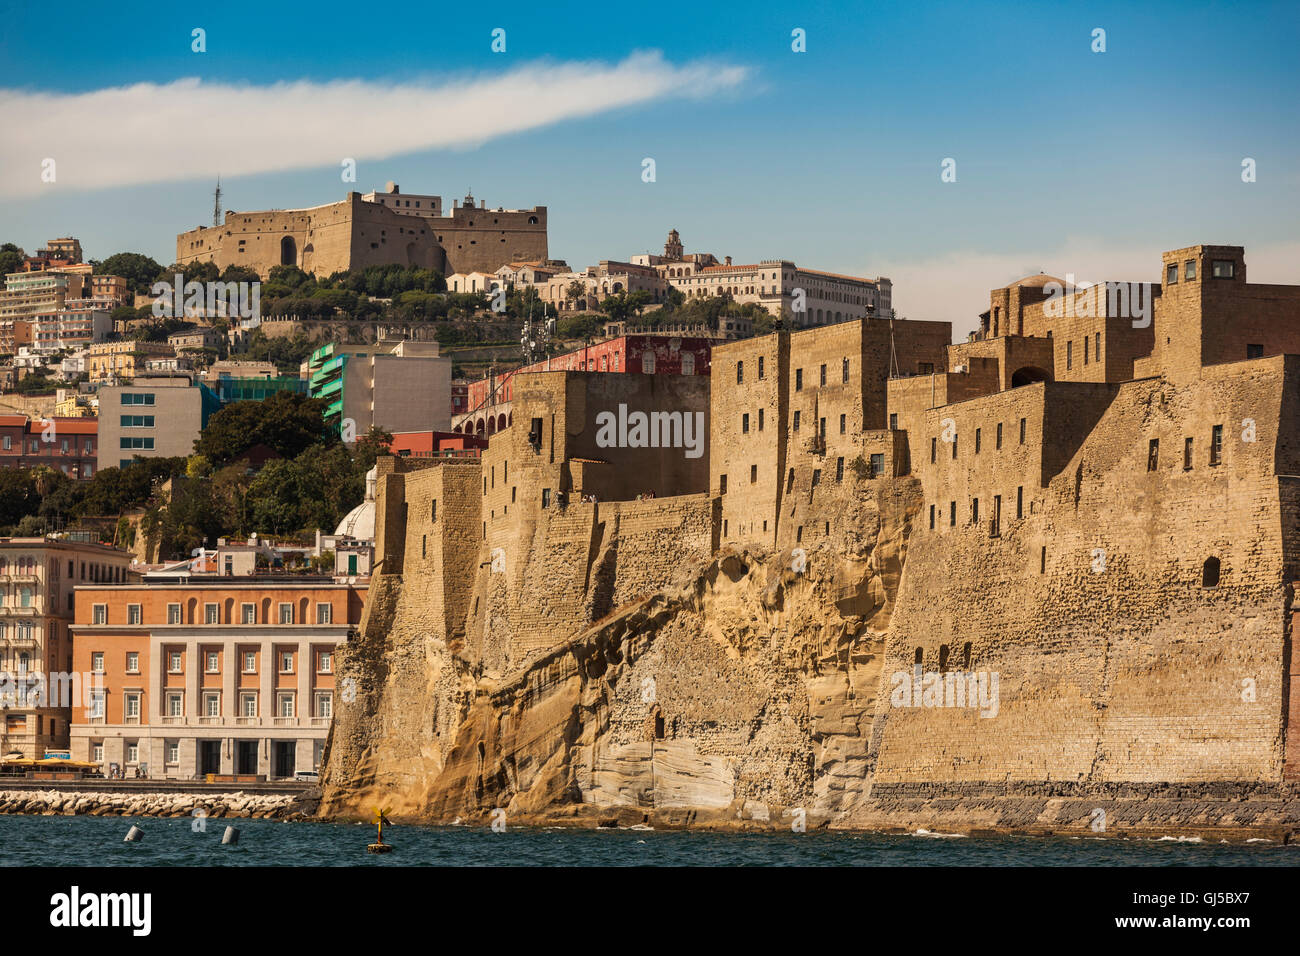 Italy, Naples as seen from the sea. Both castles in one shot: Castel dell'Ovo and Castel Sant'Elmo Stock Photo